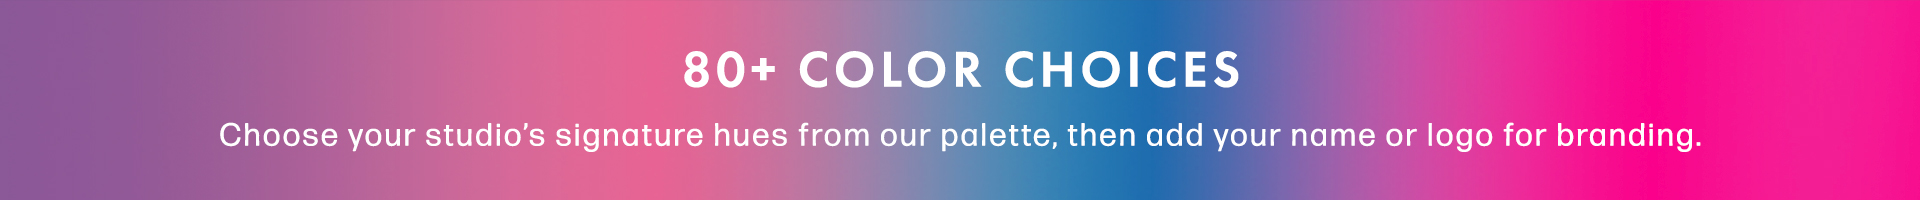 80+ Color Choices. Choose your studio's signature hues from our palette, then add your name or logo for branding.